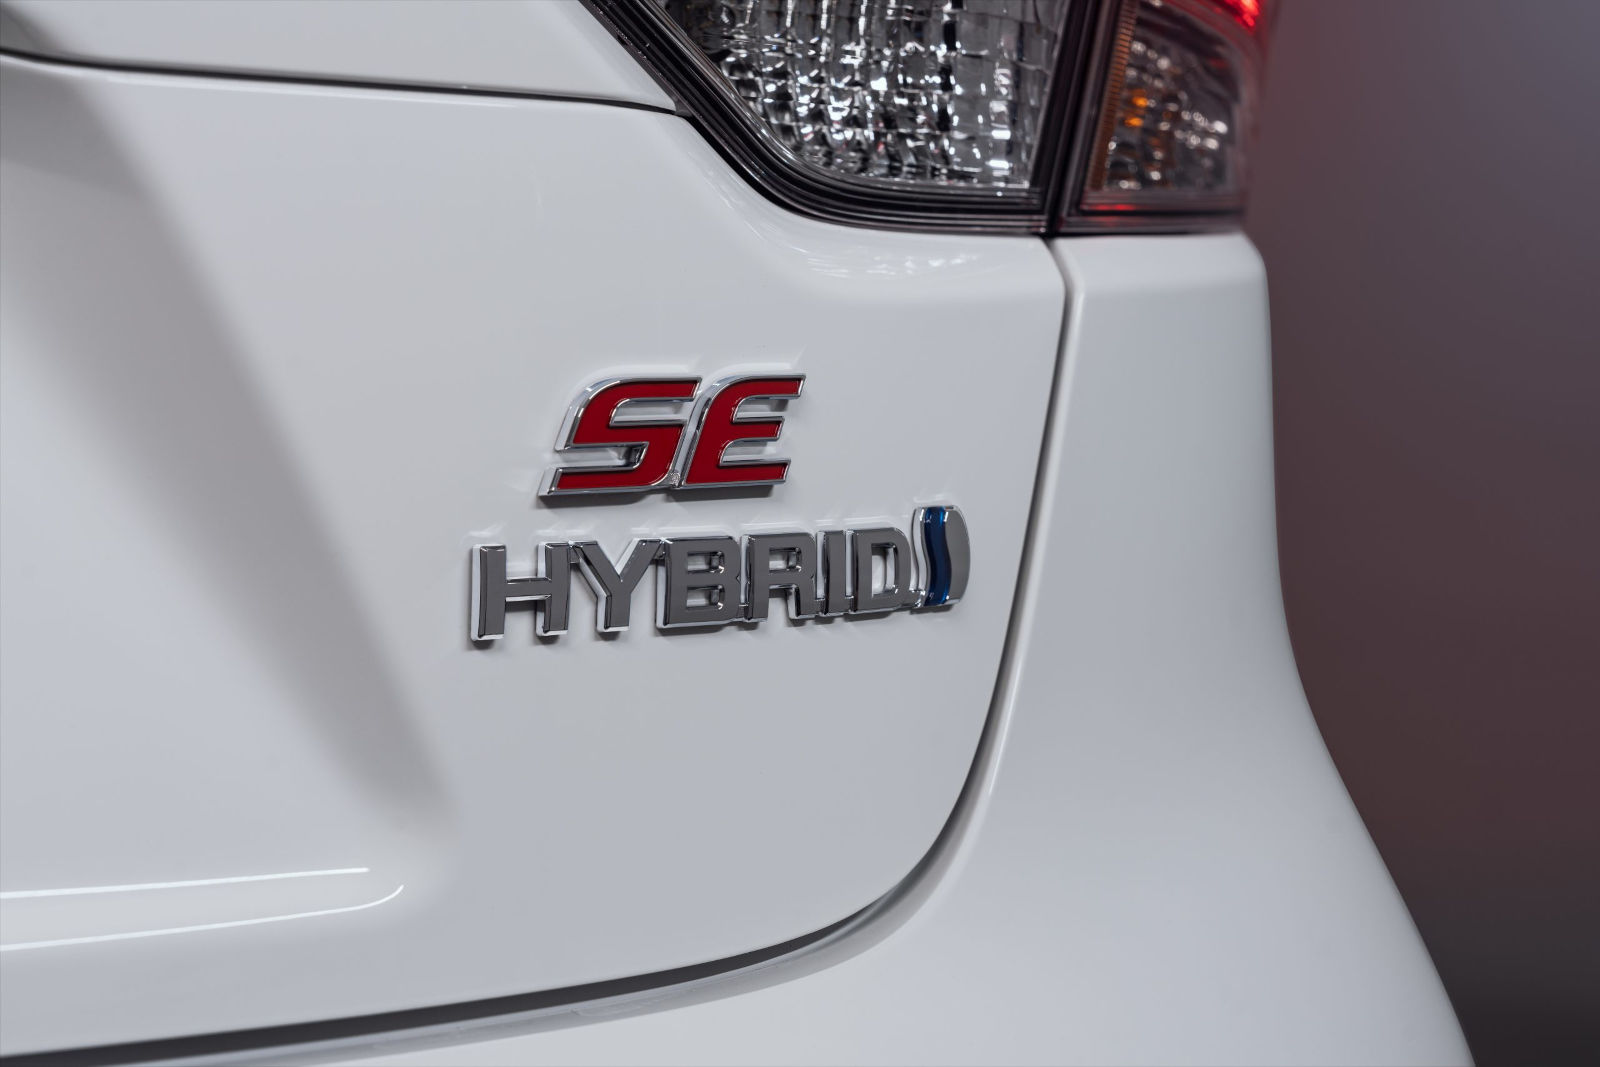 10 things Toyota Hybrid owners love about their vehicle